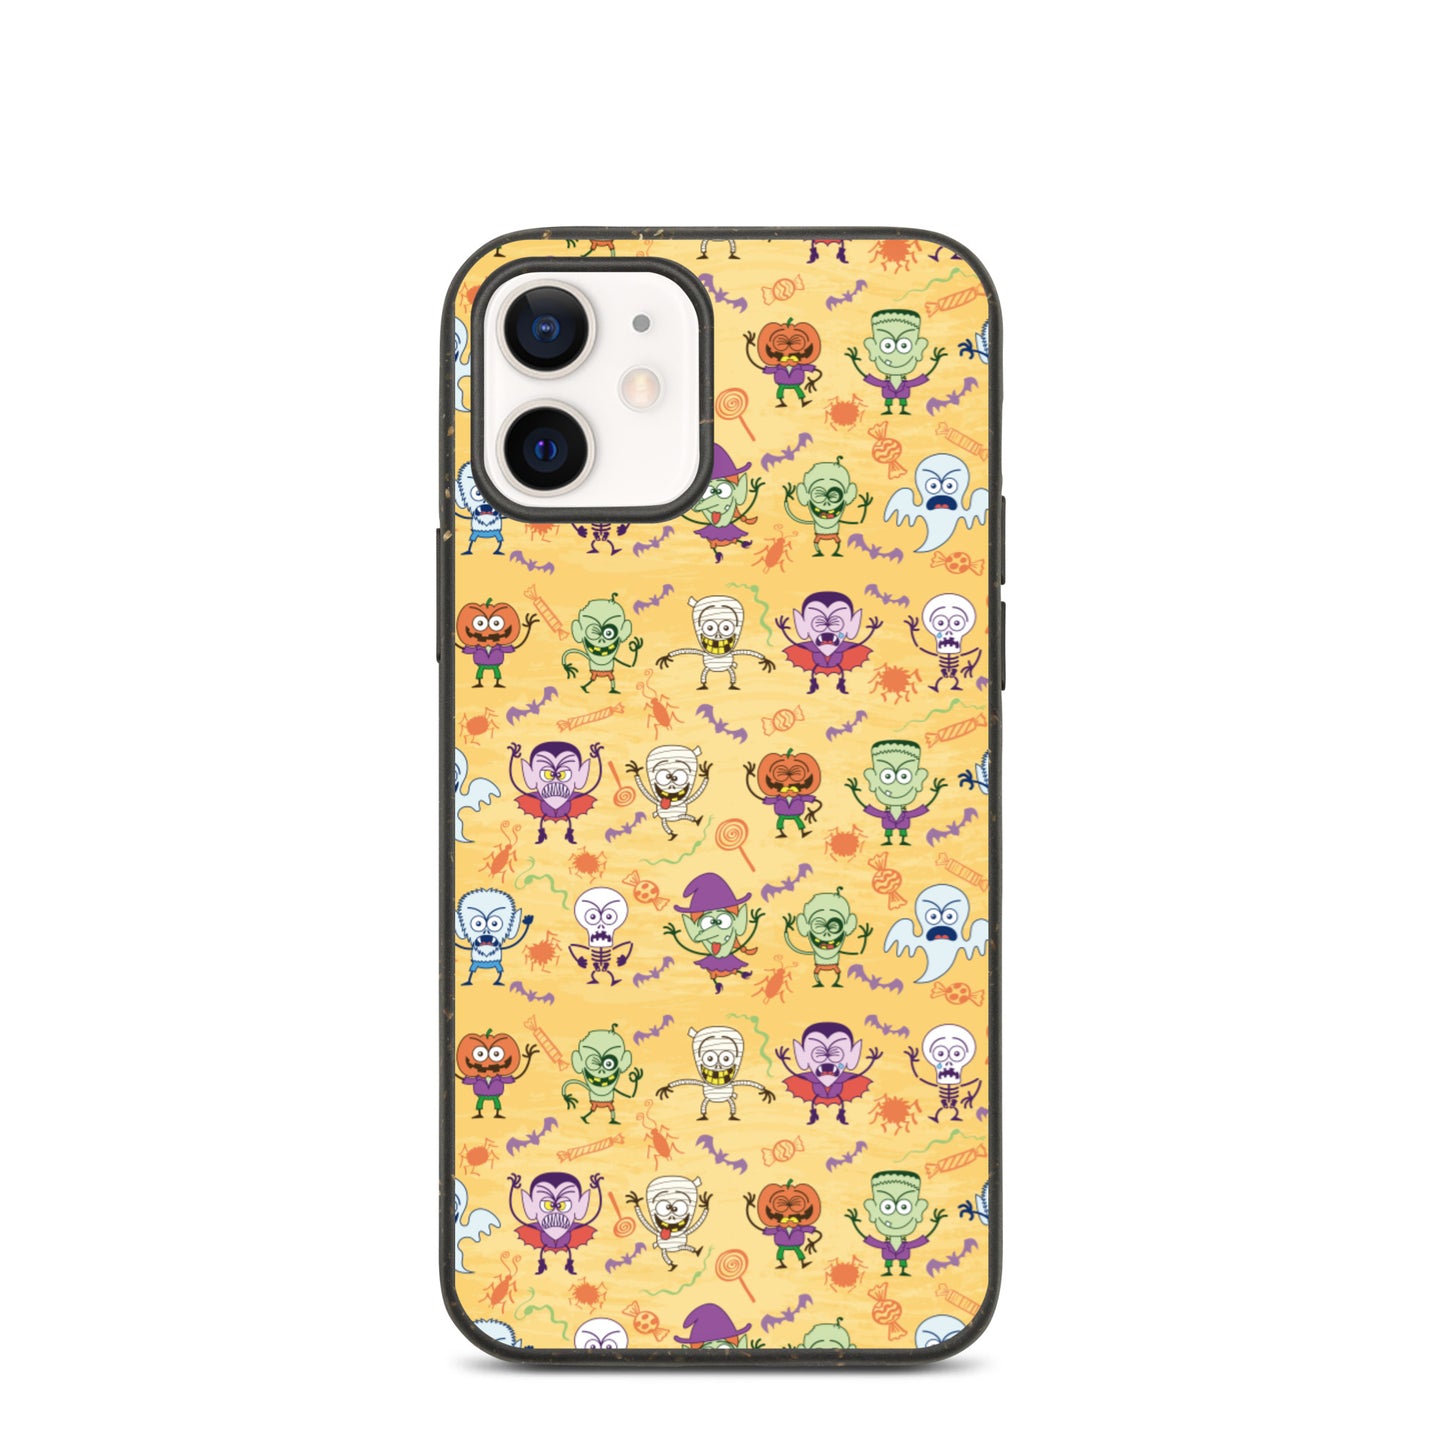 Halloween characters making funny faces Speckled iPhone case. IPhone 12